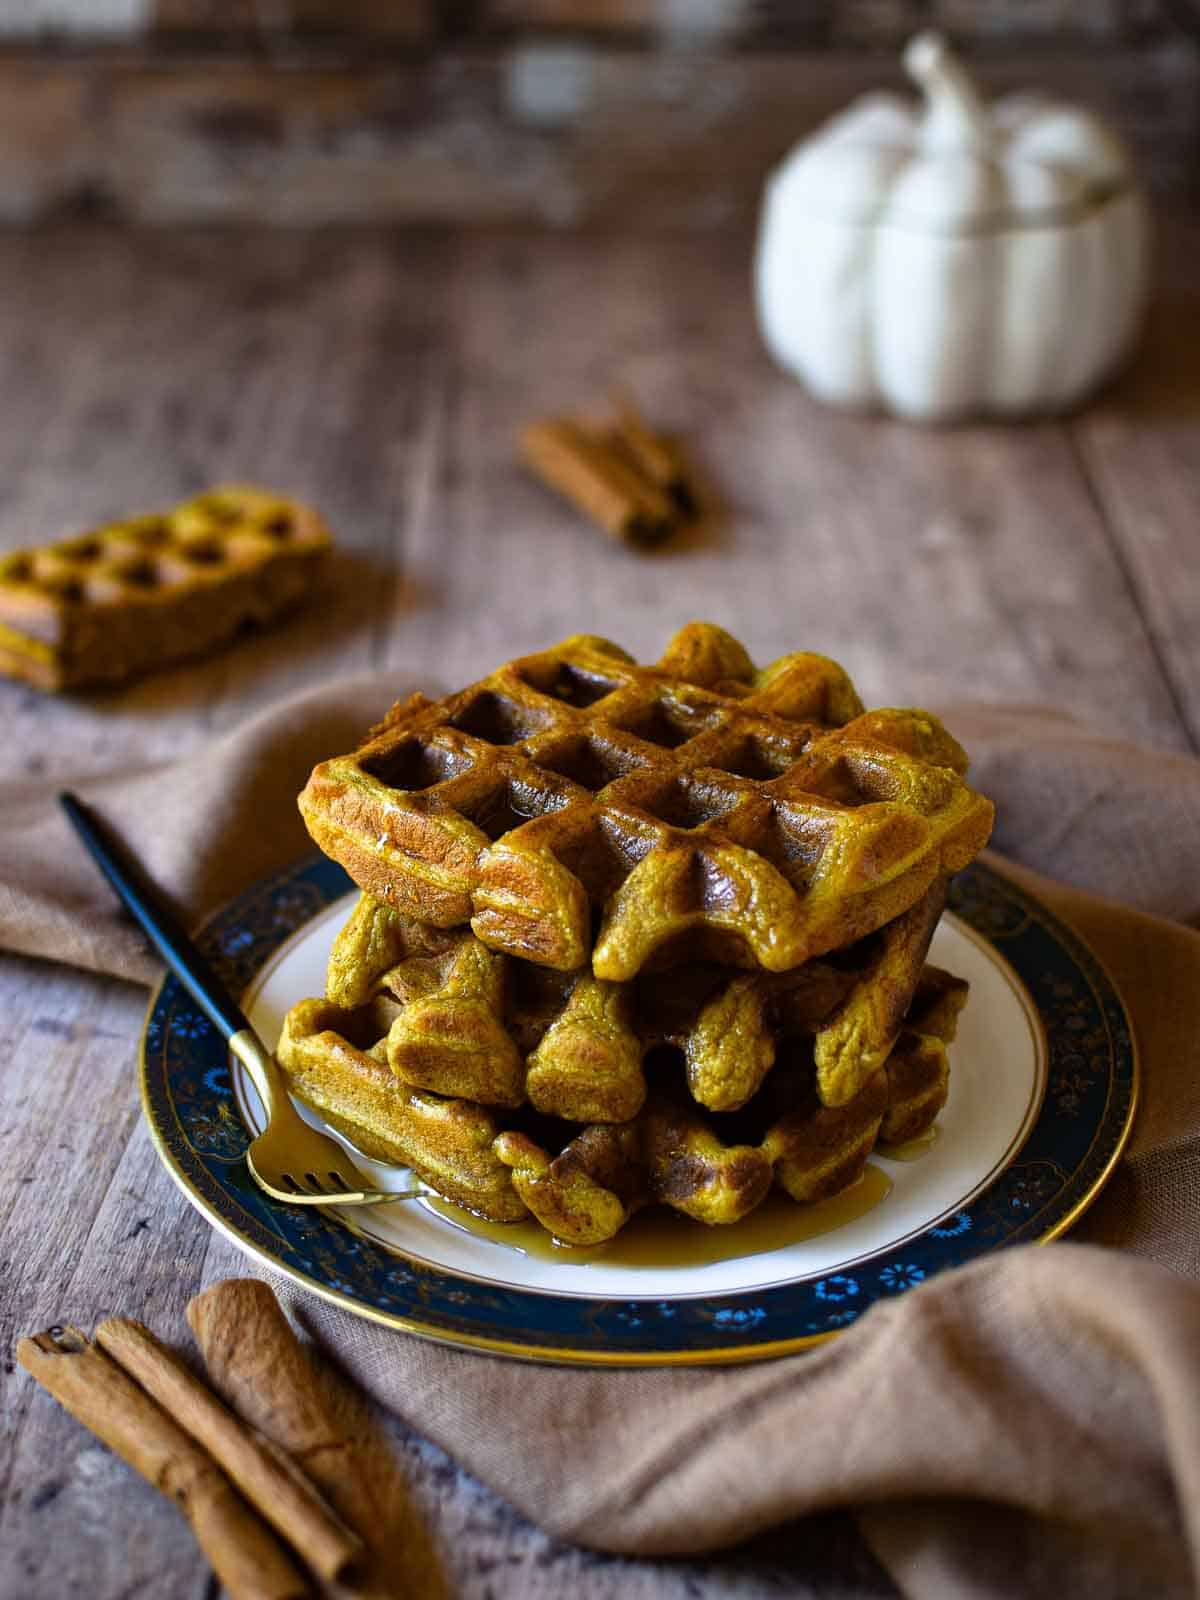 Pumpkin waffles stacked on a plate with maple syrup and cinnamon on a wooden surface.